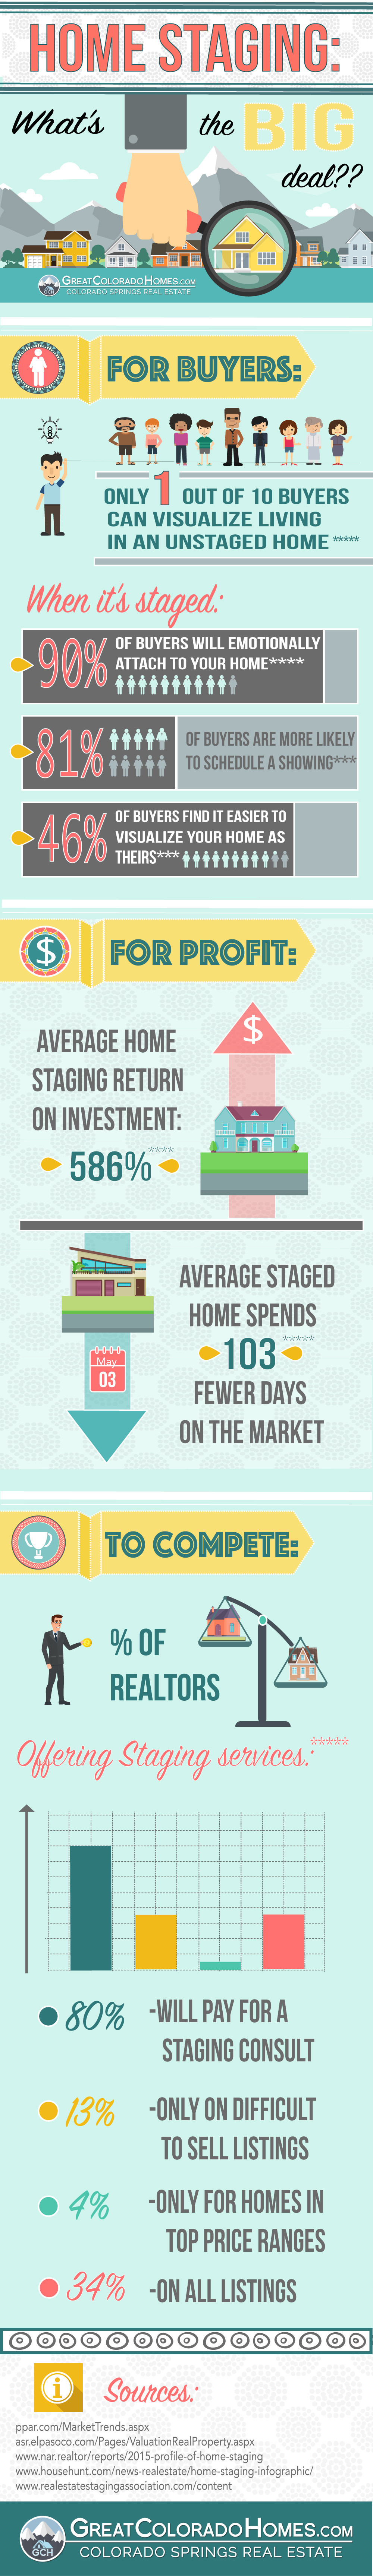 Home Staging Whats The Big Deal Infographic